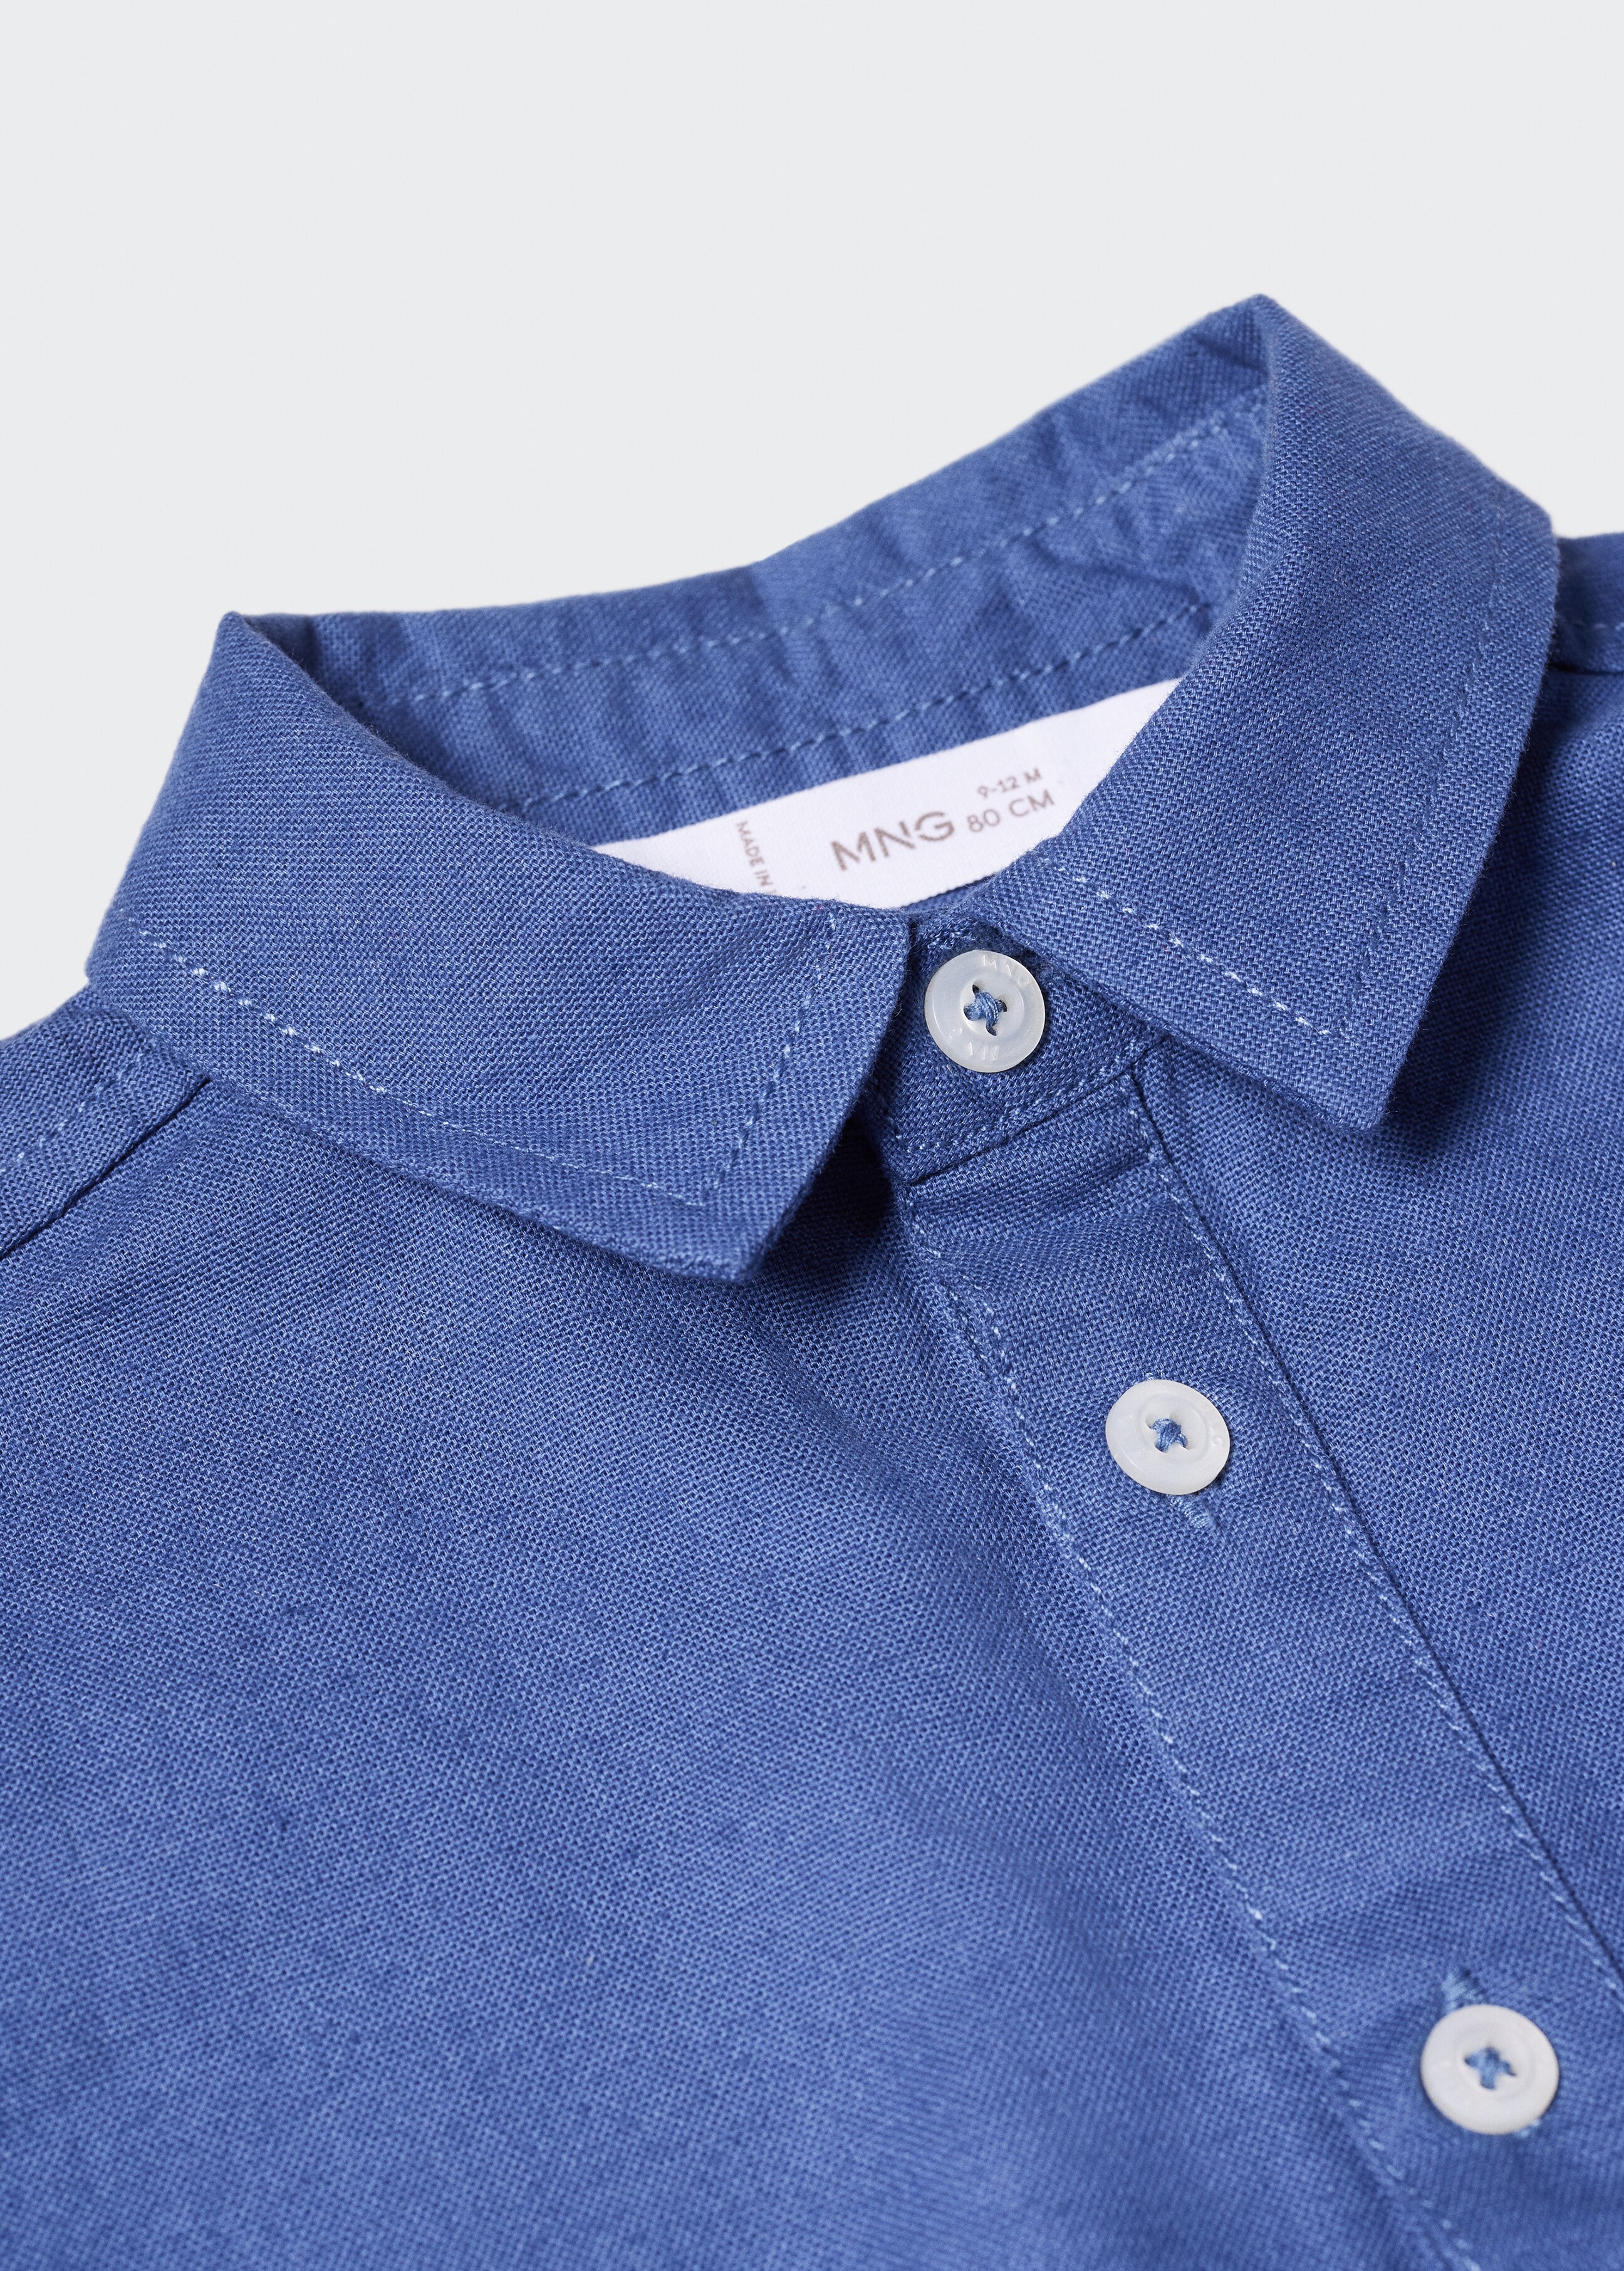 Cotton shirt - Details of the article 8